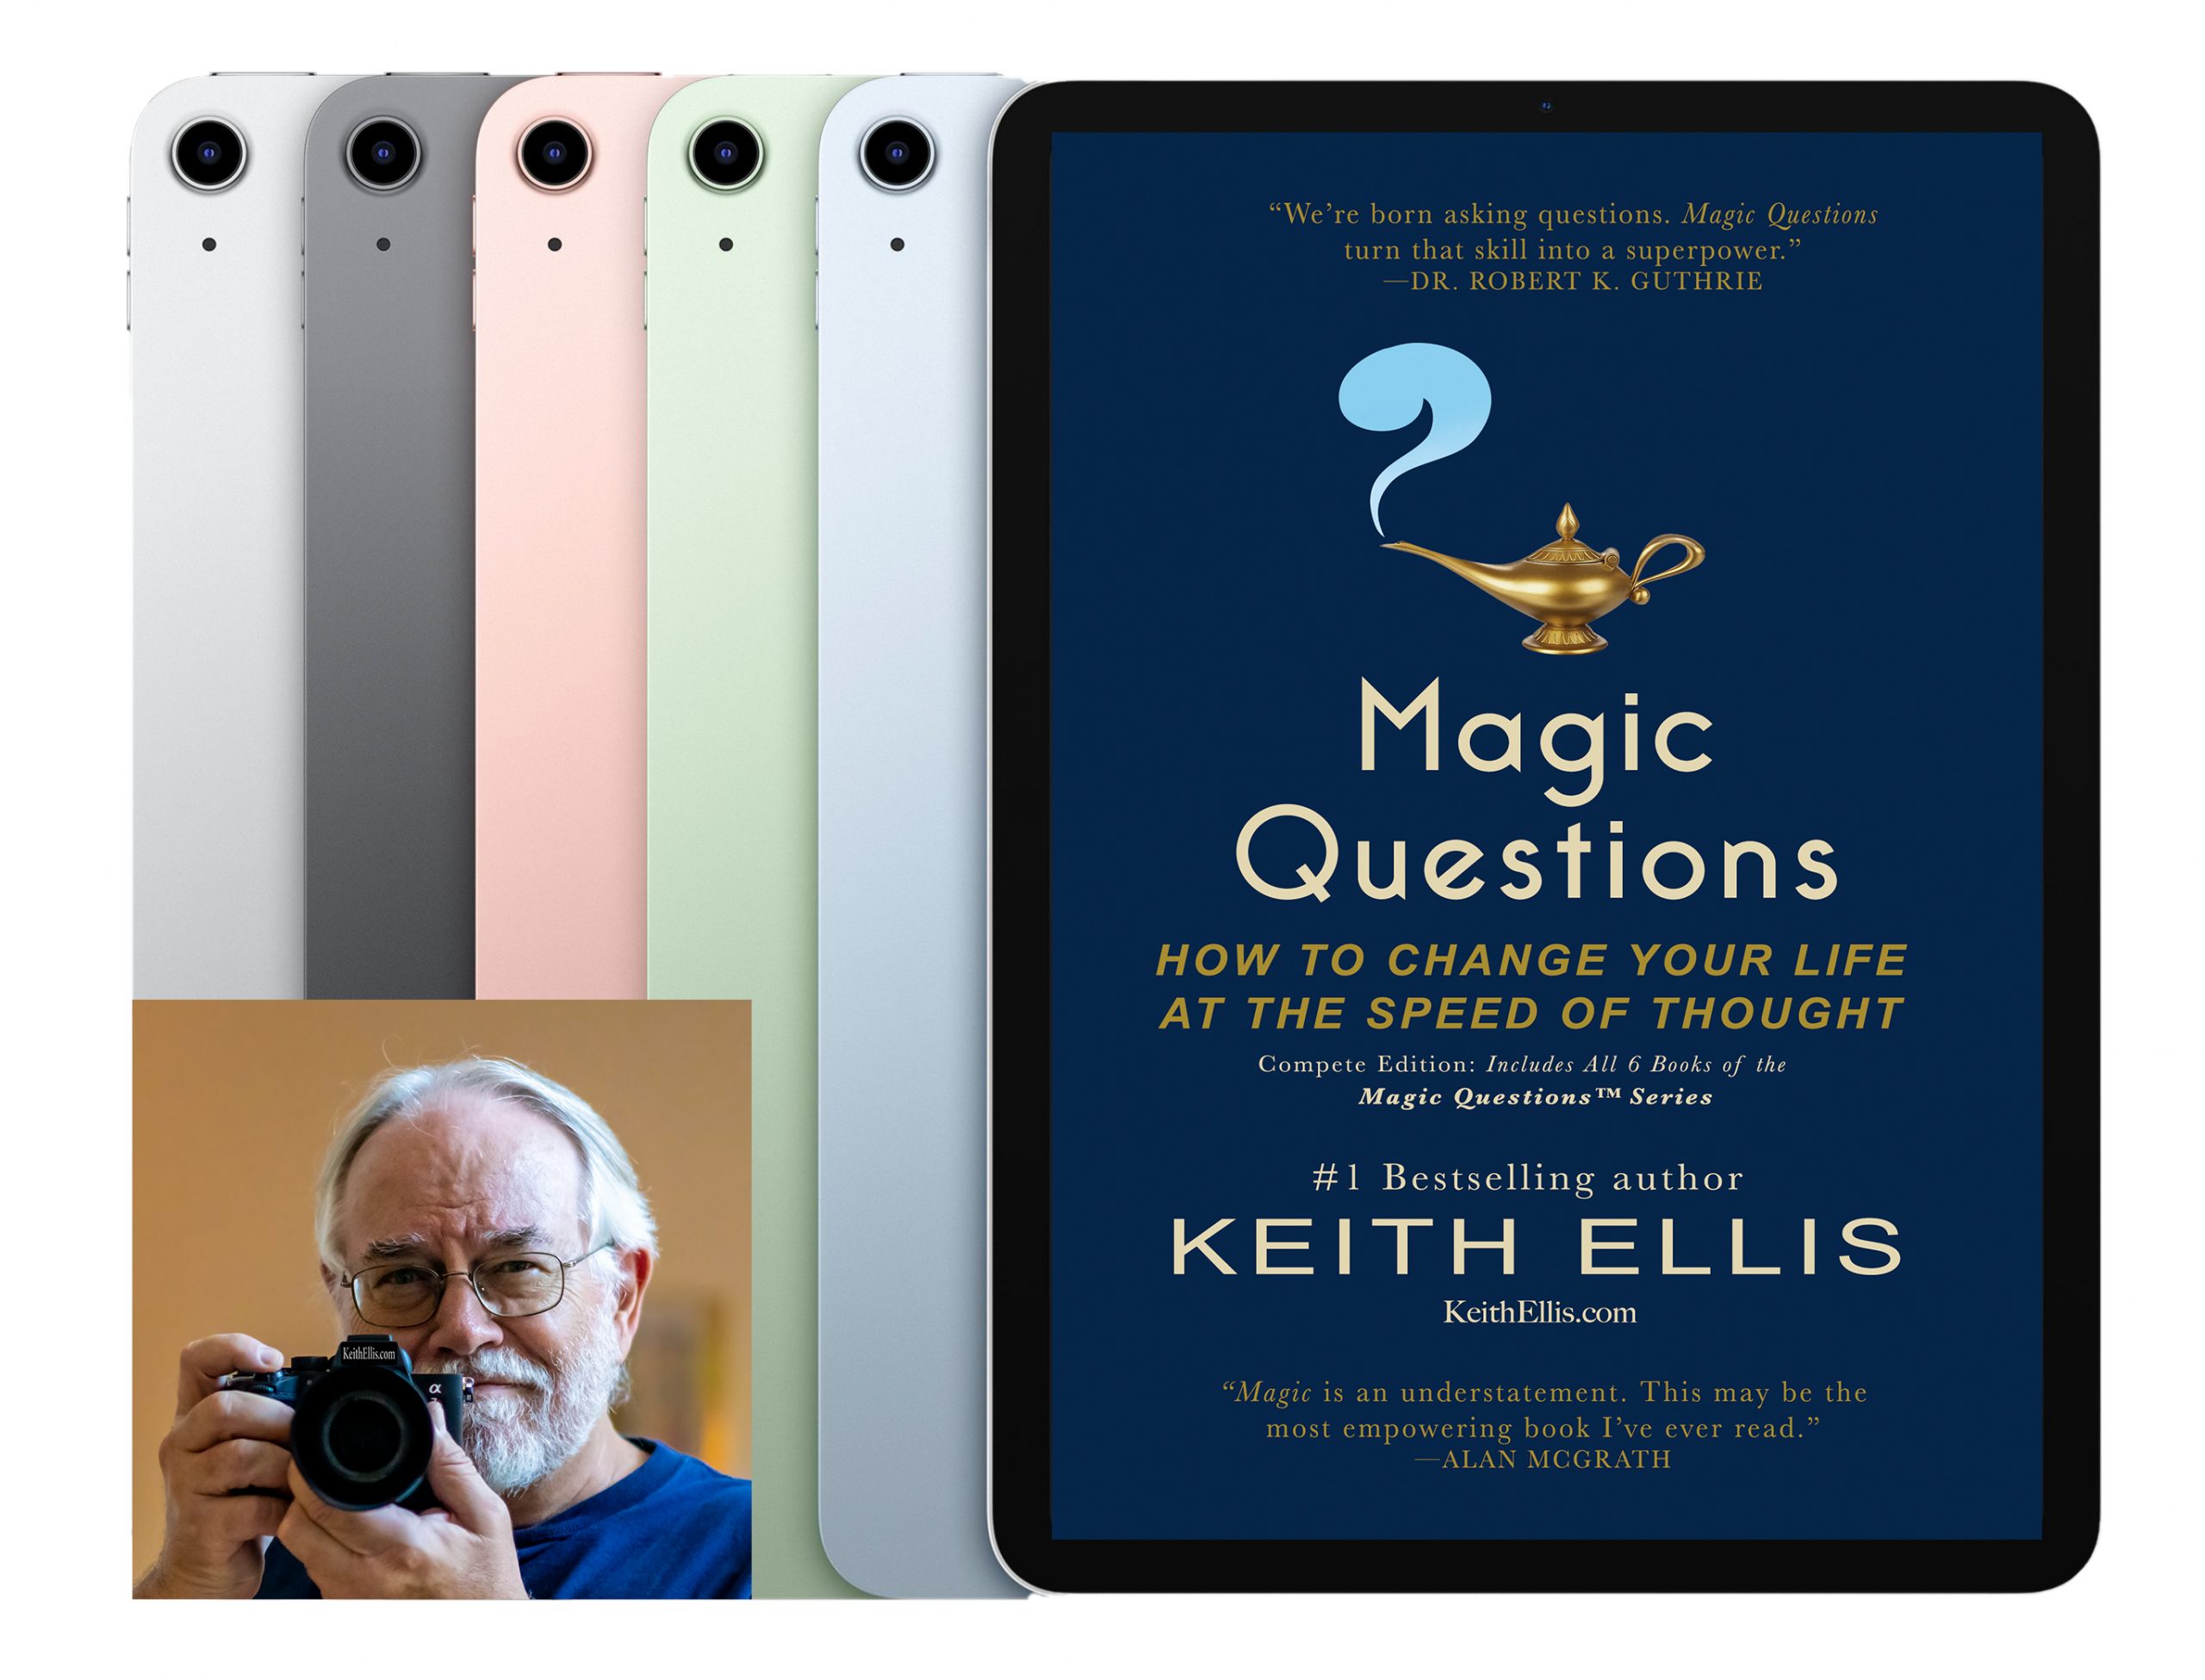 The latest iPad Air preloaded with best-selling books from #1 best-selling author Keith Ellis Giveaway